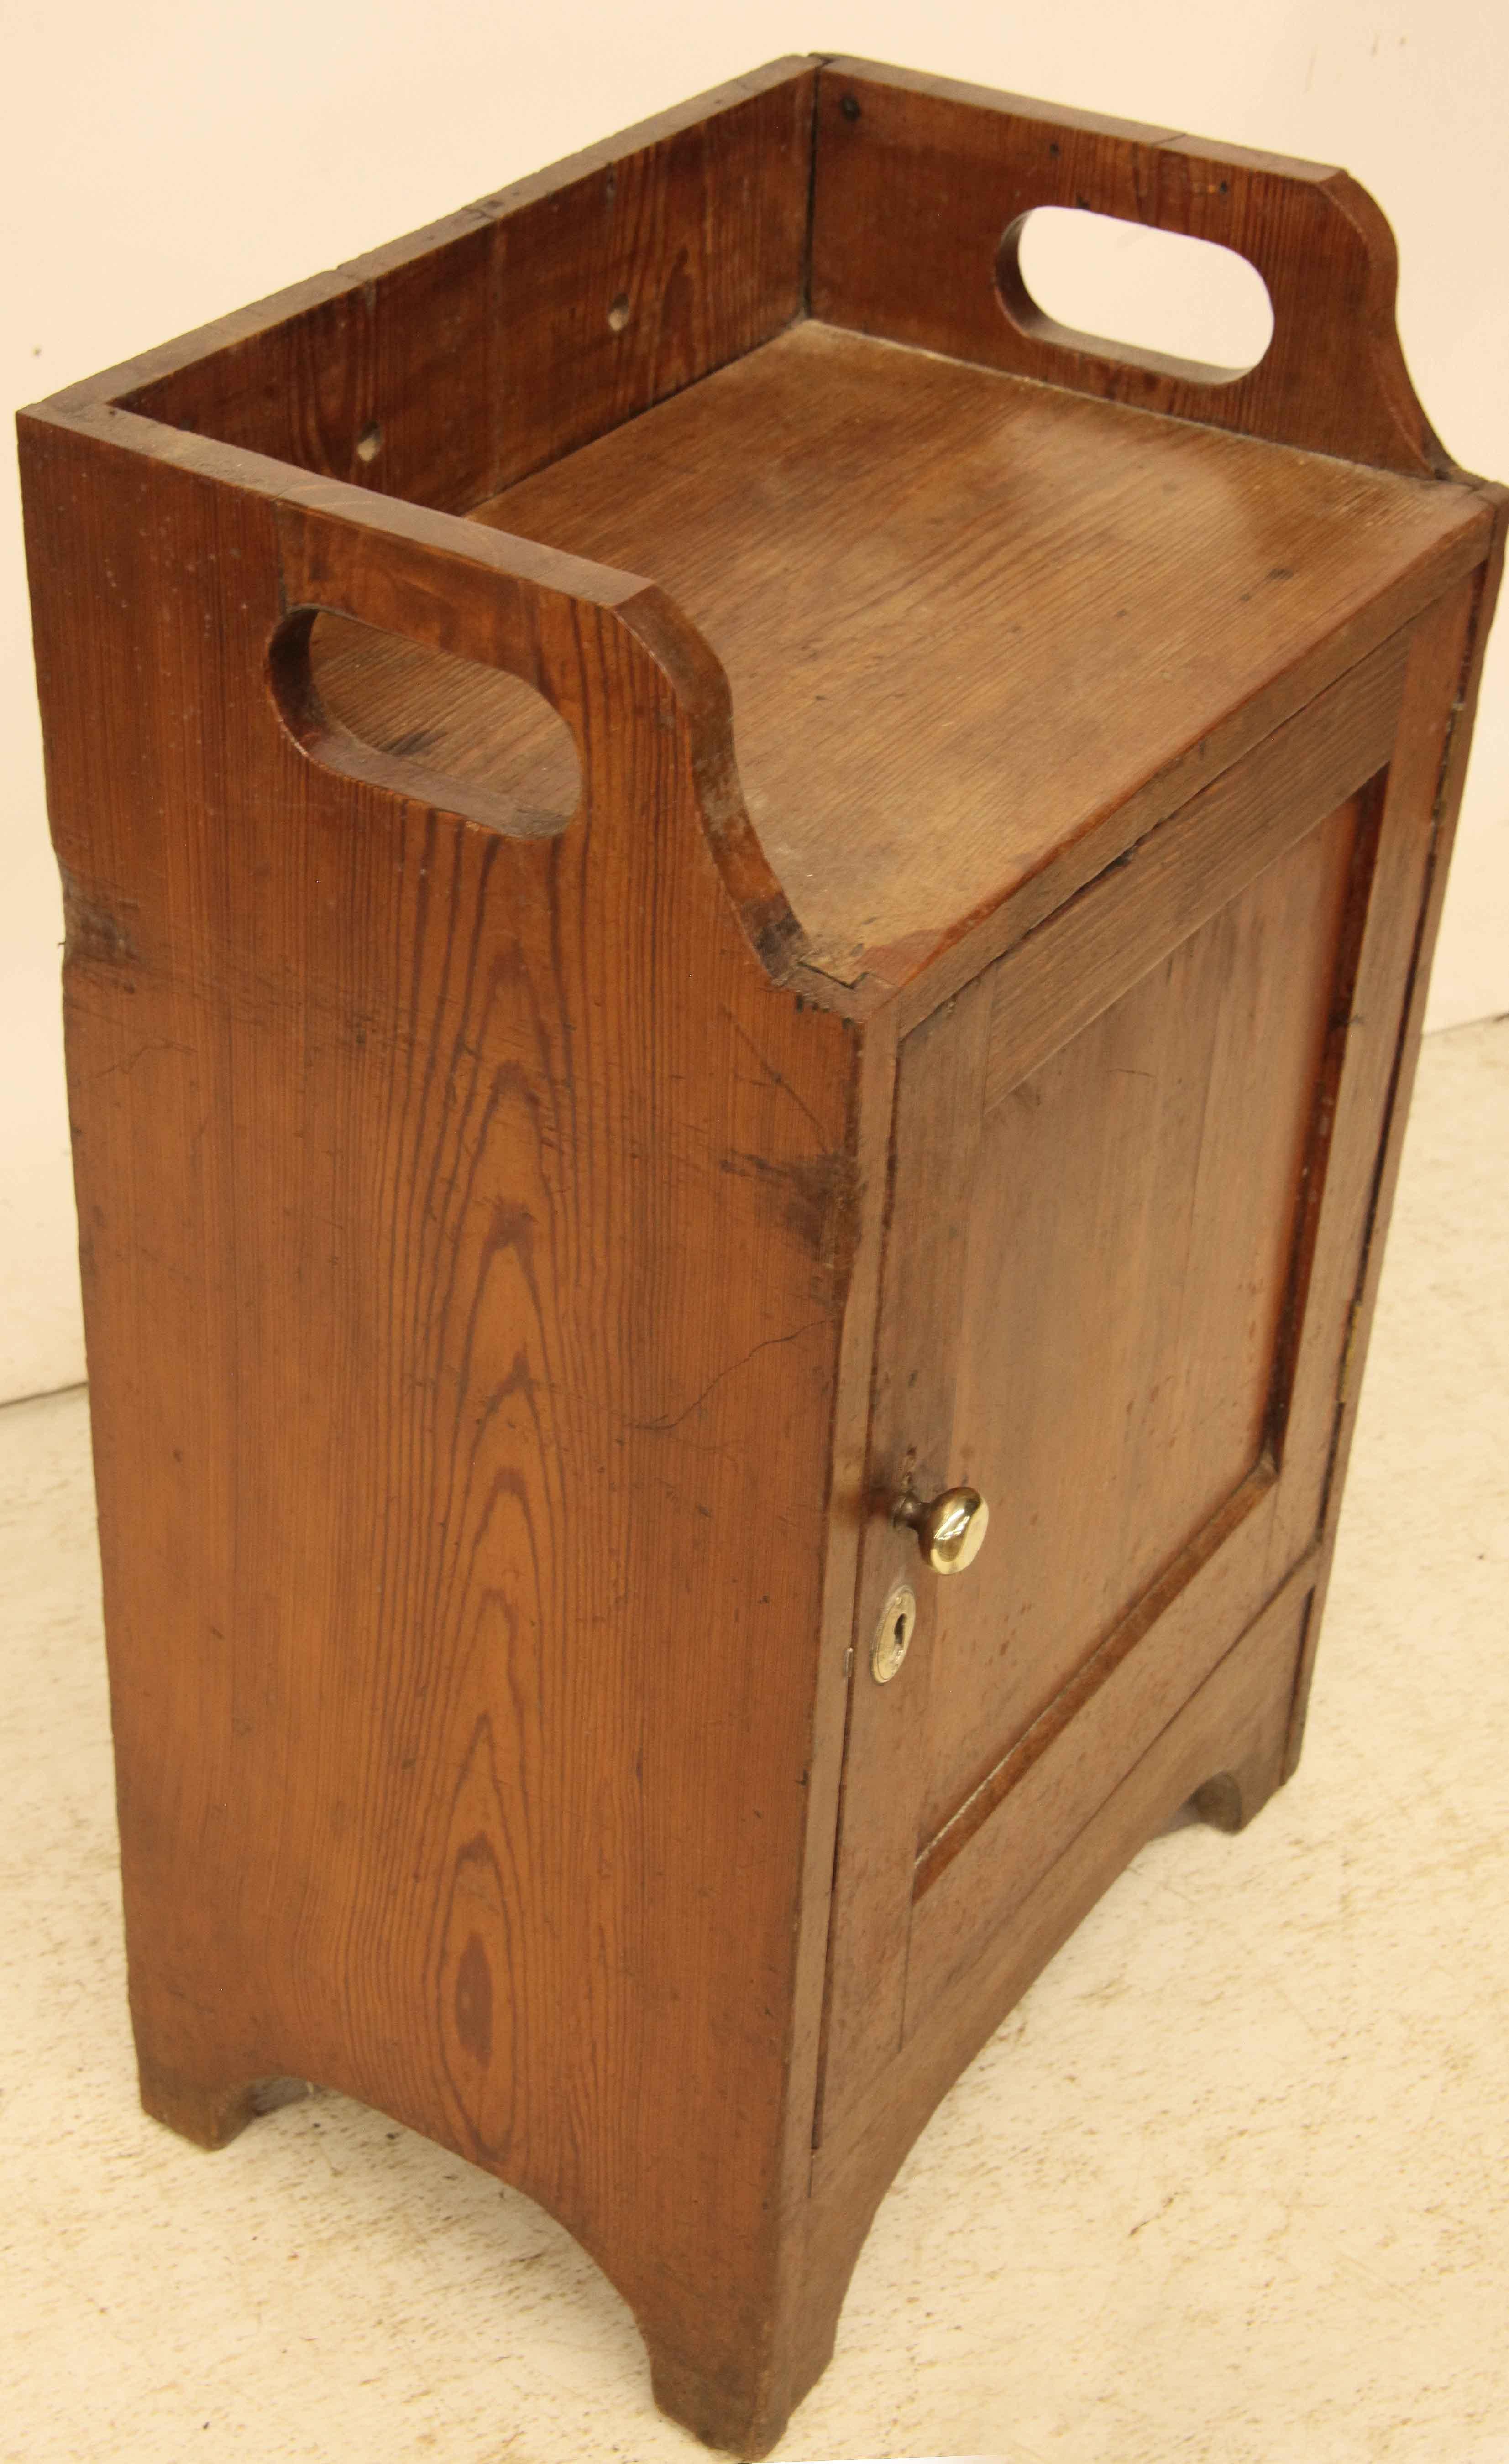 English heart pine cupboard, with gallery around the top having cut out handles on the sides for carrying, single door with original brass knob opens to reveal interior with one shelf.  The surface height is 25.5''